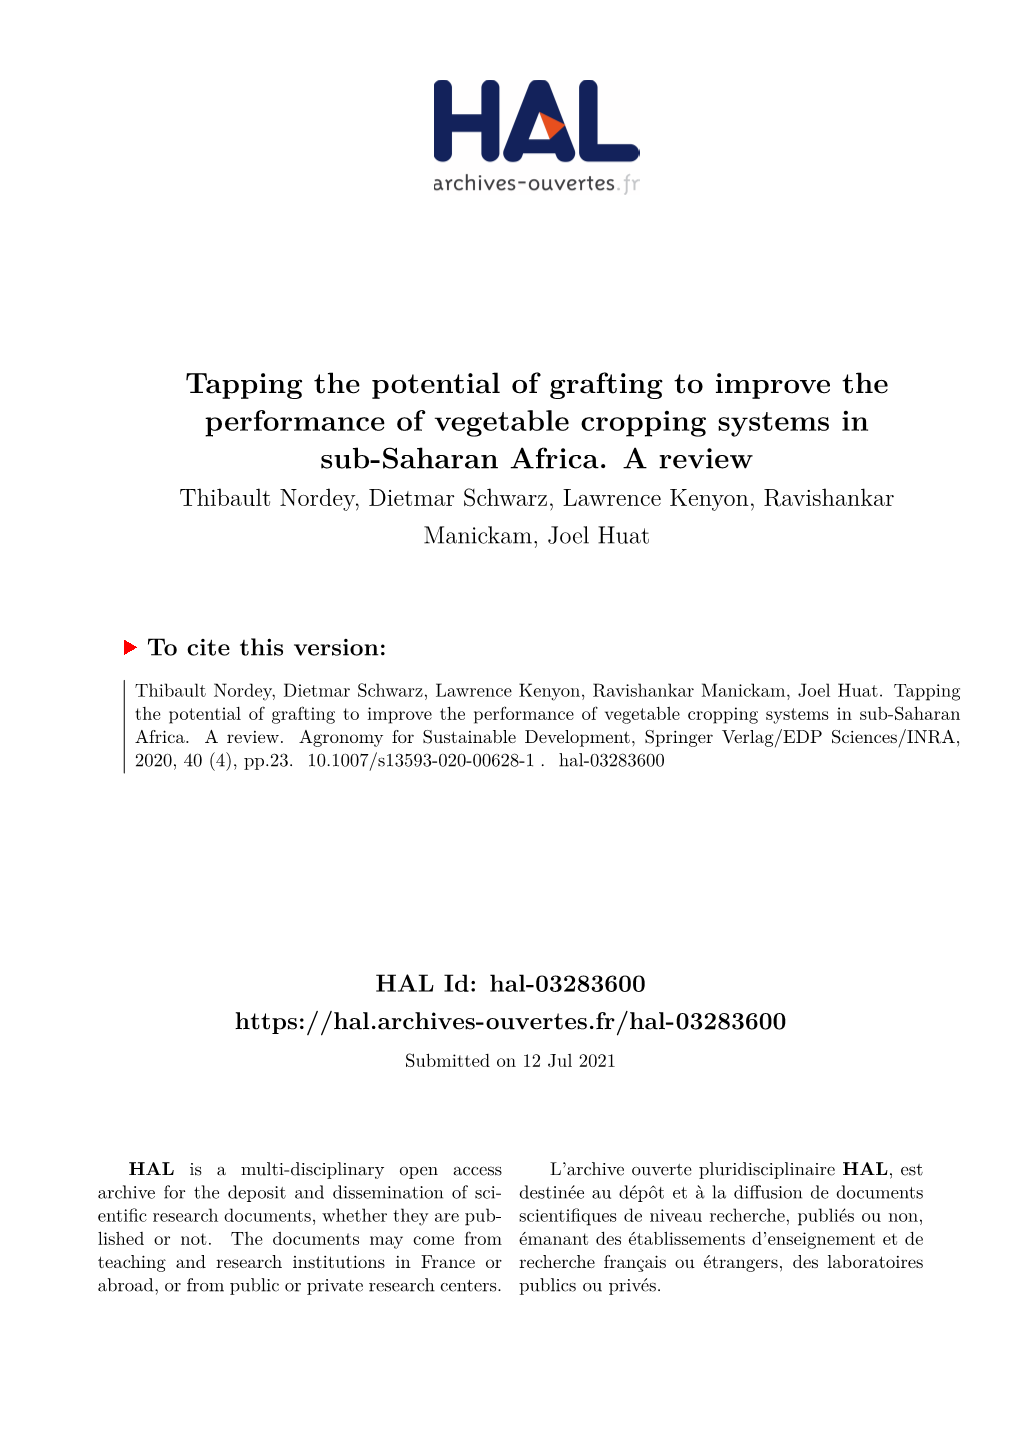 Tapping the Potential of Grafting to Improve the Performance of Vegetable Cropping Systems in Sub-Saharan Africa